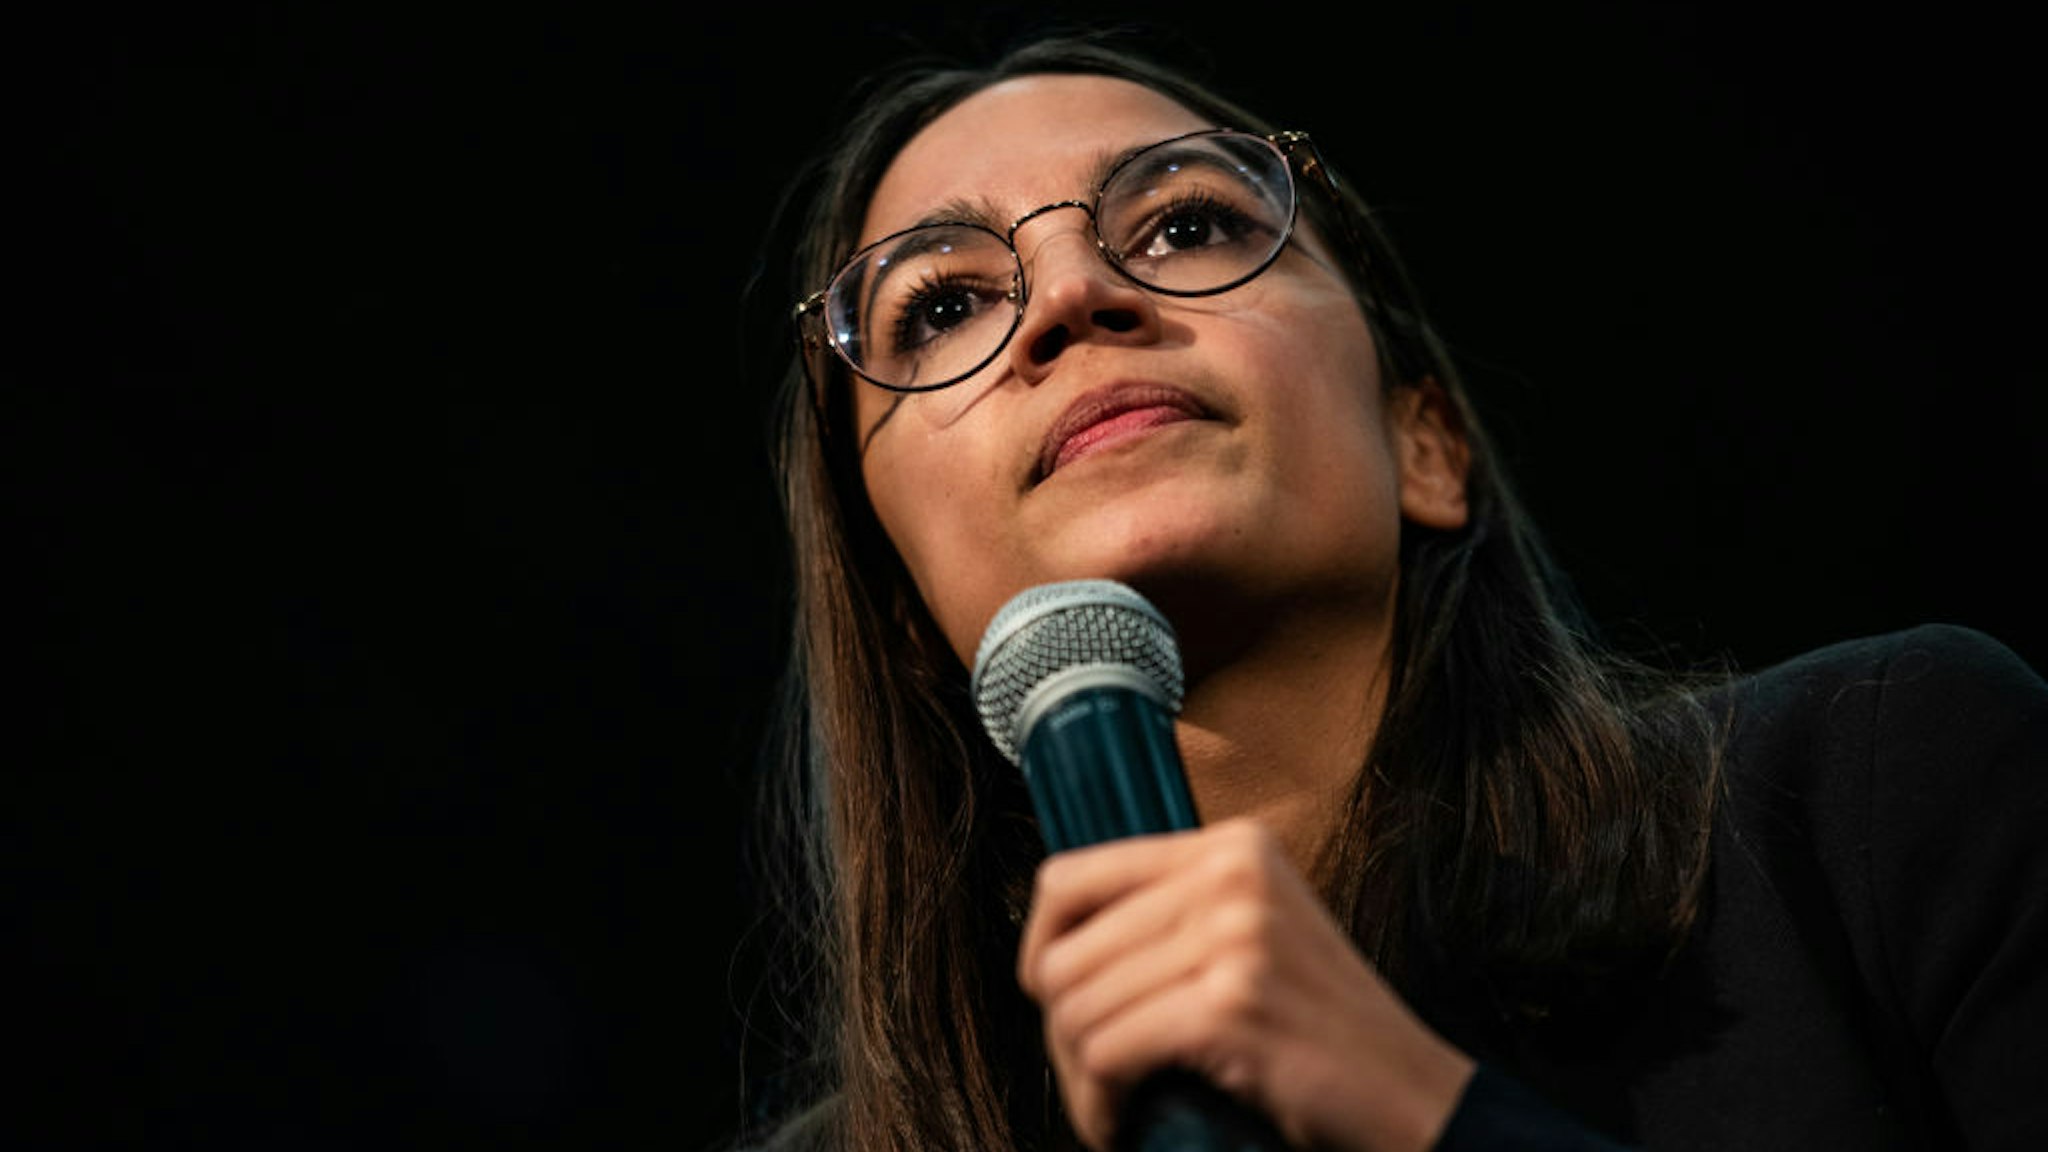 SIOUX CITY, IOWA - JANUARY 26: Alexandria Ocasio-Cortez, D-N.Y., speaks ahead of Sen. Bernie Sanders, I-Vt., 2020 Democratic Presidential Candidate during a rally on Sunday, January 26, 2020 in Sioux City, Iowa.